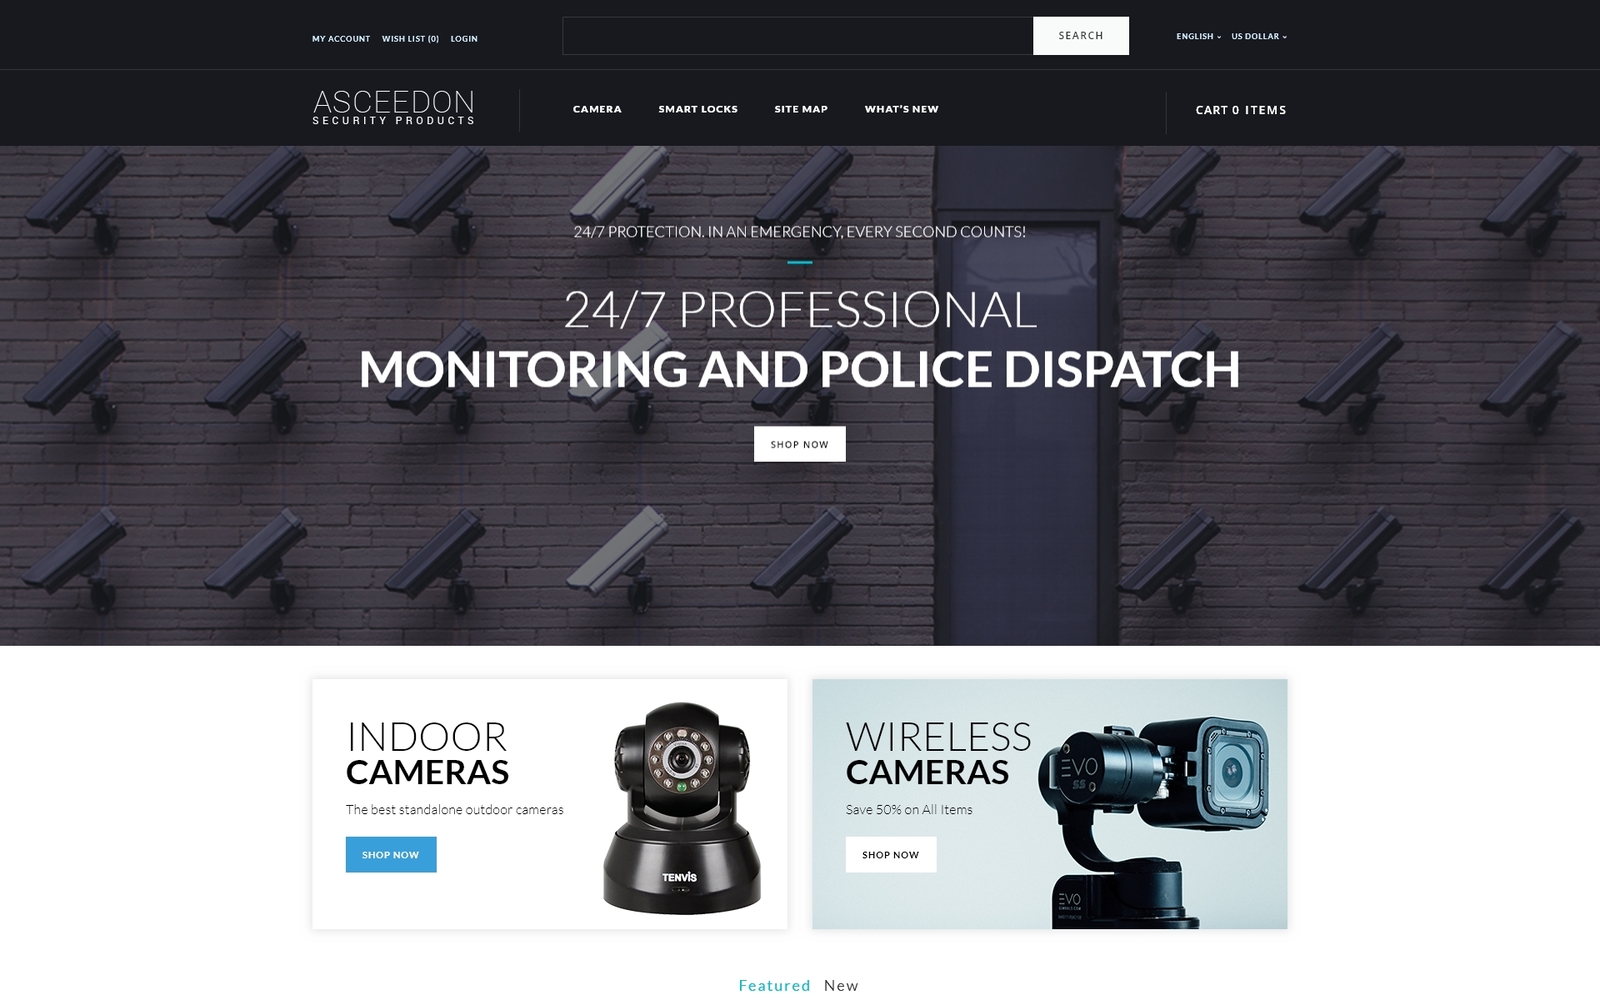 ASCEEDON - Security Products 